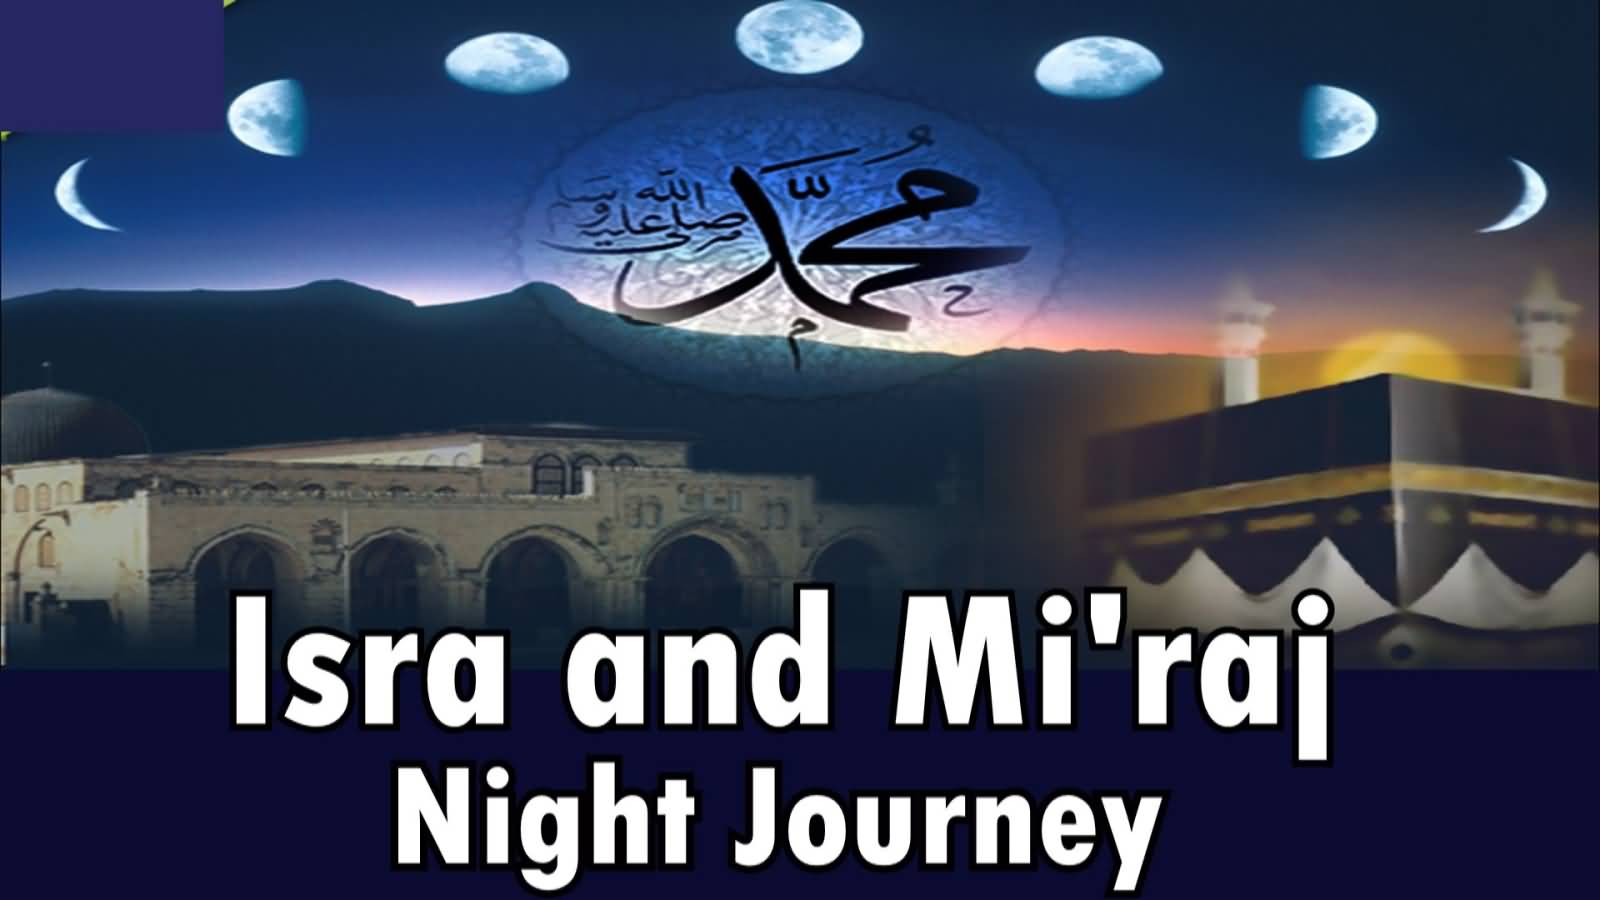 45 Most Incredible Al Isra and Mi'raj Greeting Pictures 